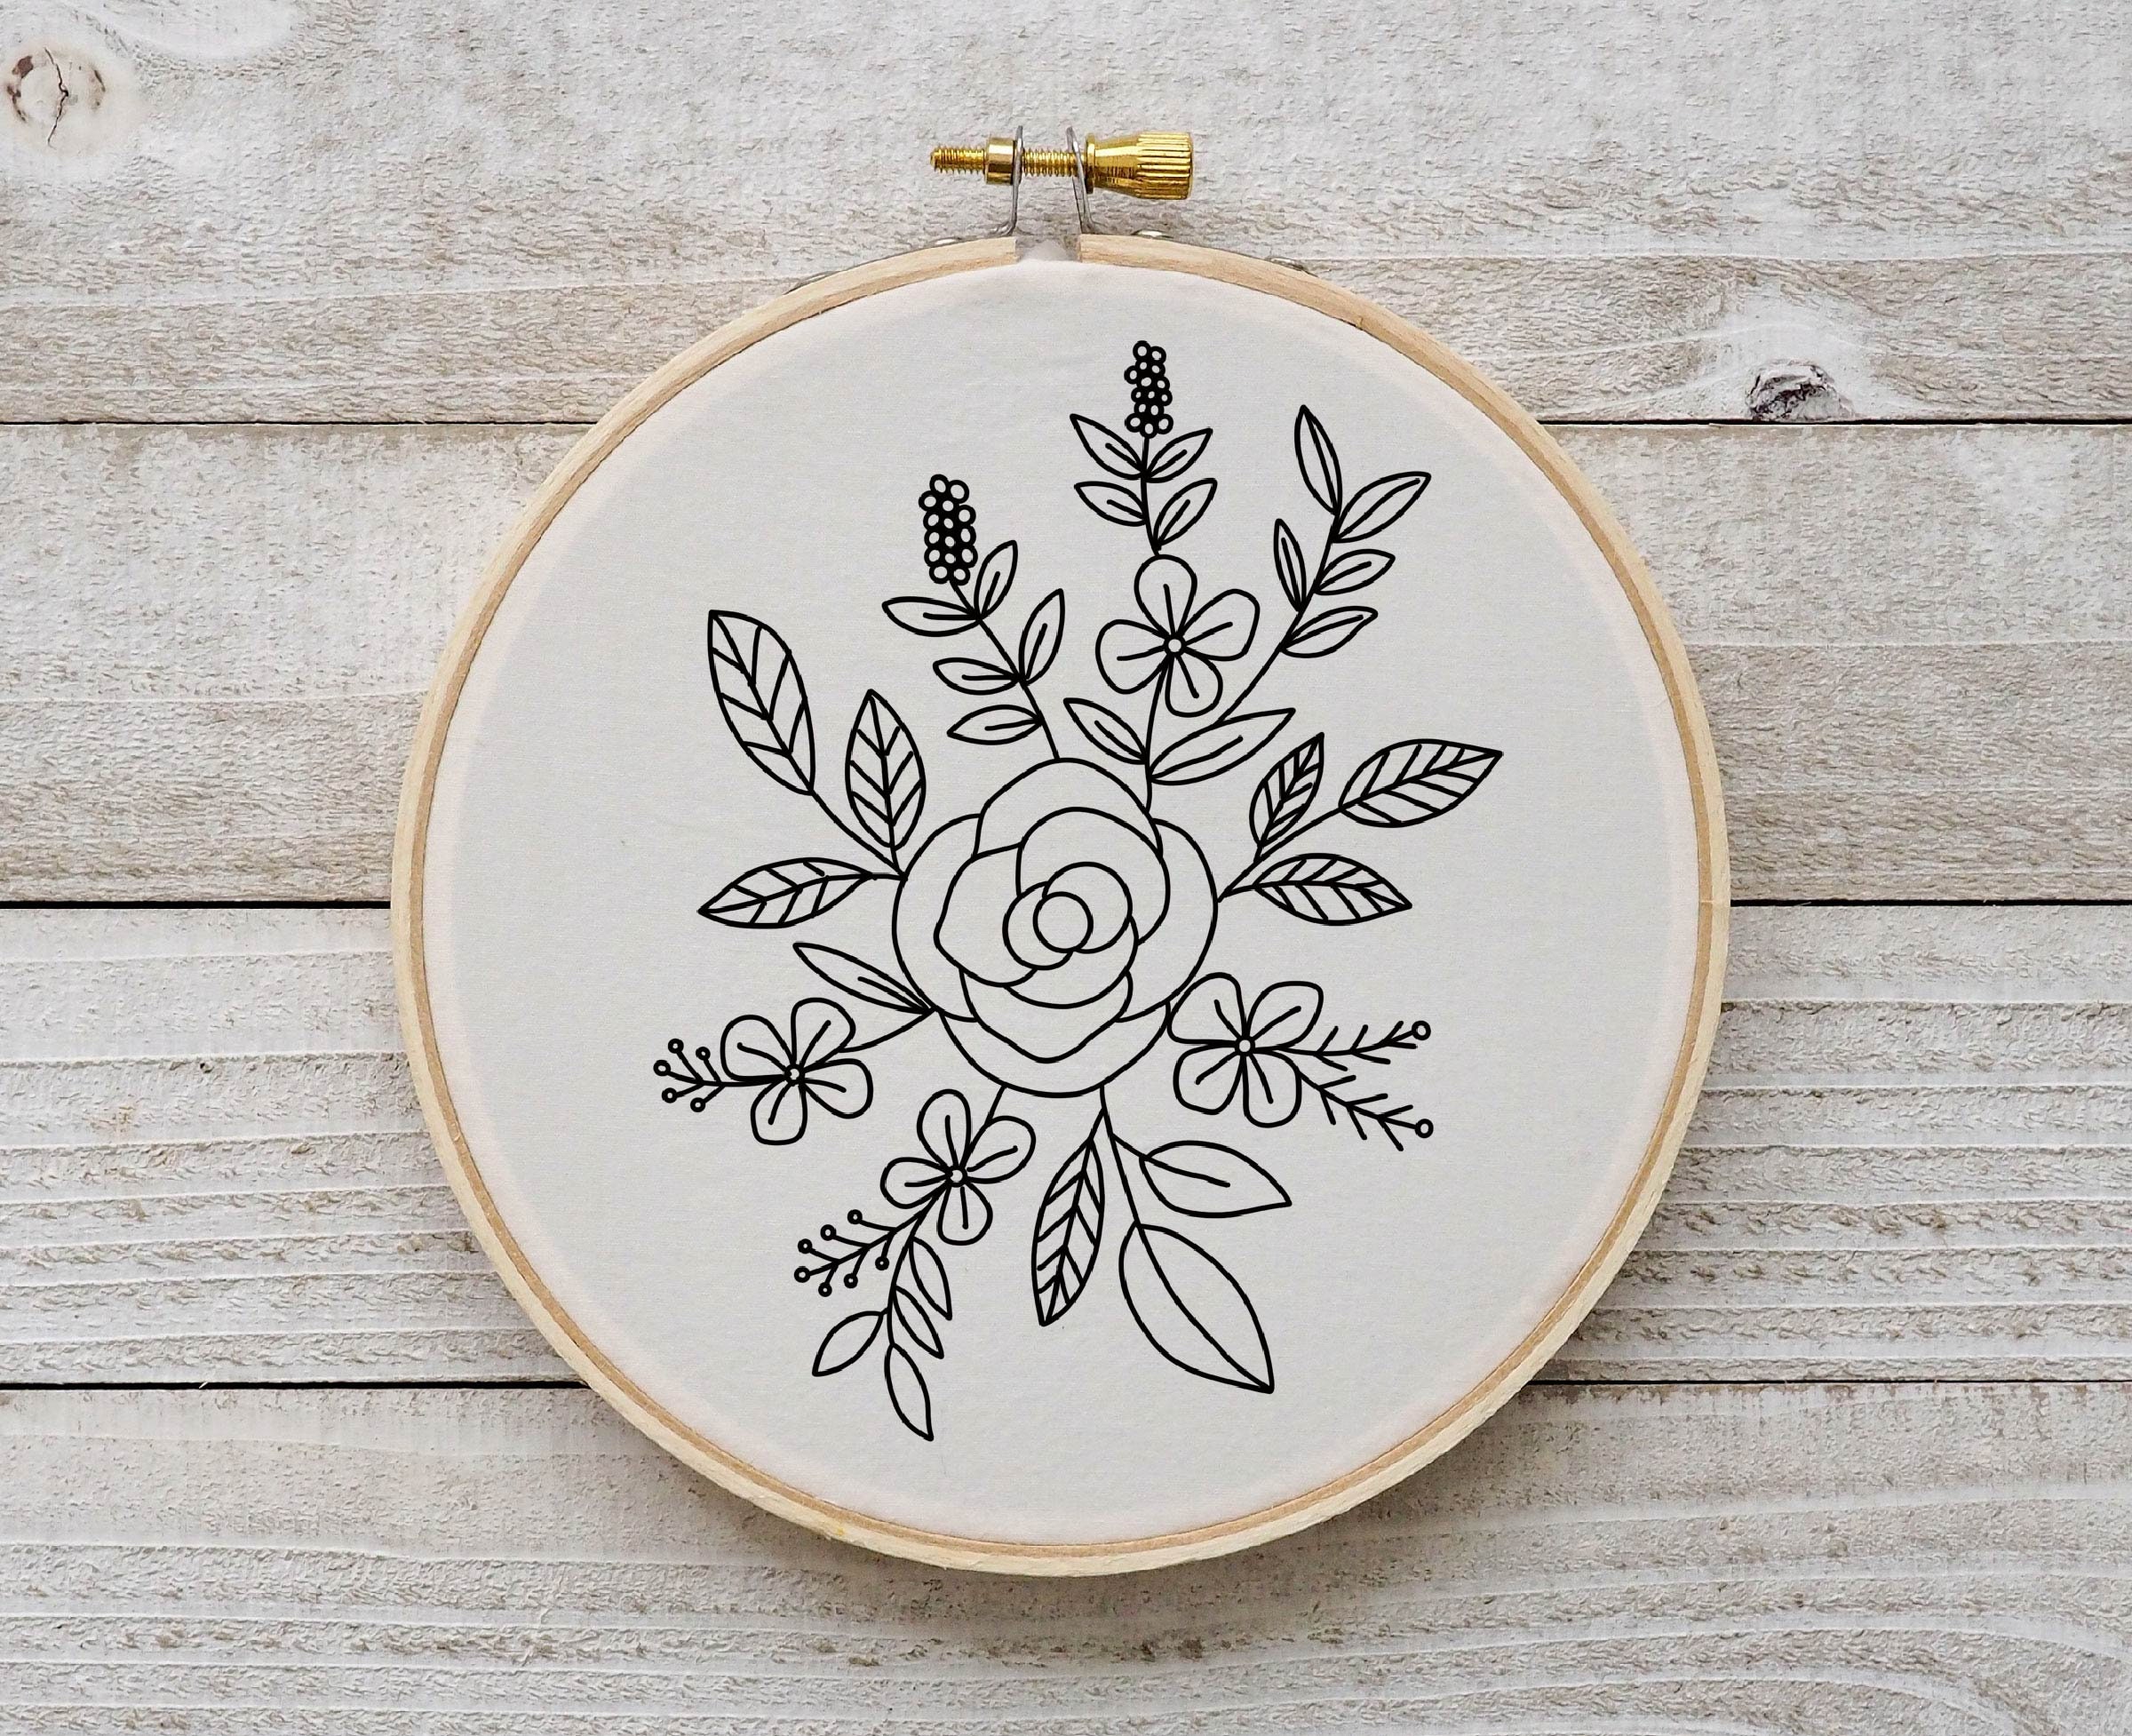 Flower Embroidery Pattern Floral Embroidery Pattern Flower Hoop Art Flower  Hand Embroidery Pattern PDF Instant Download 